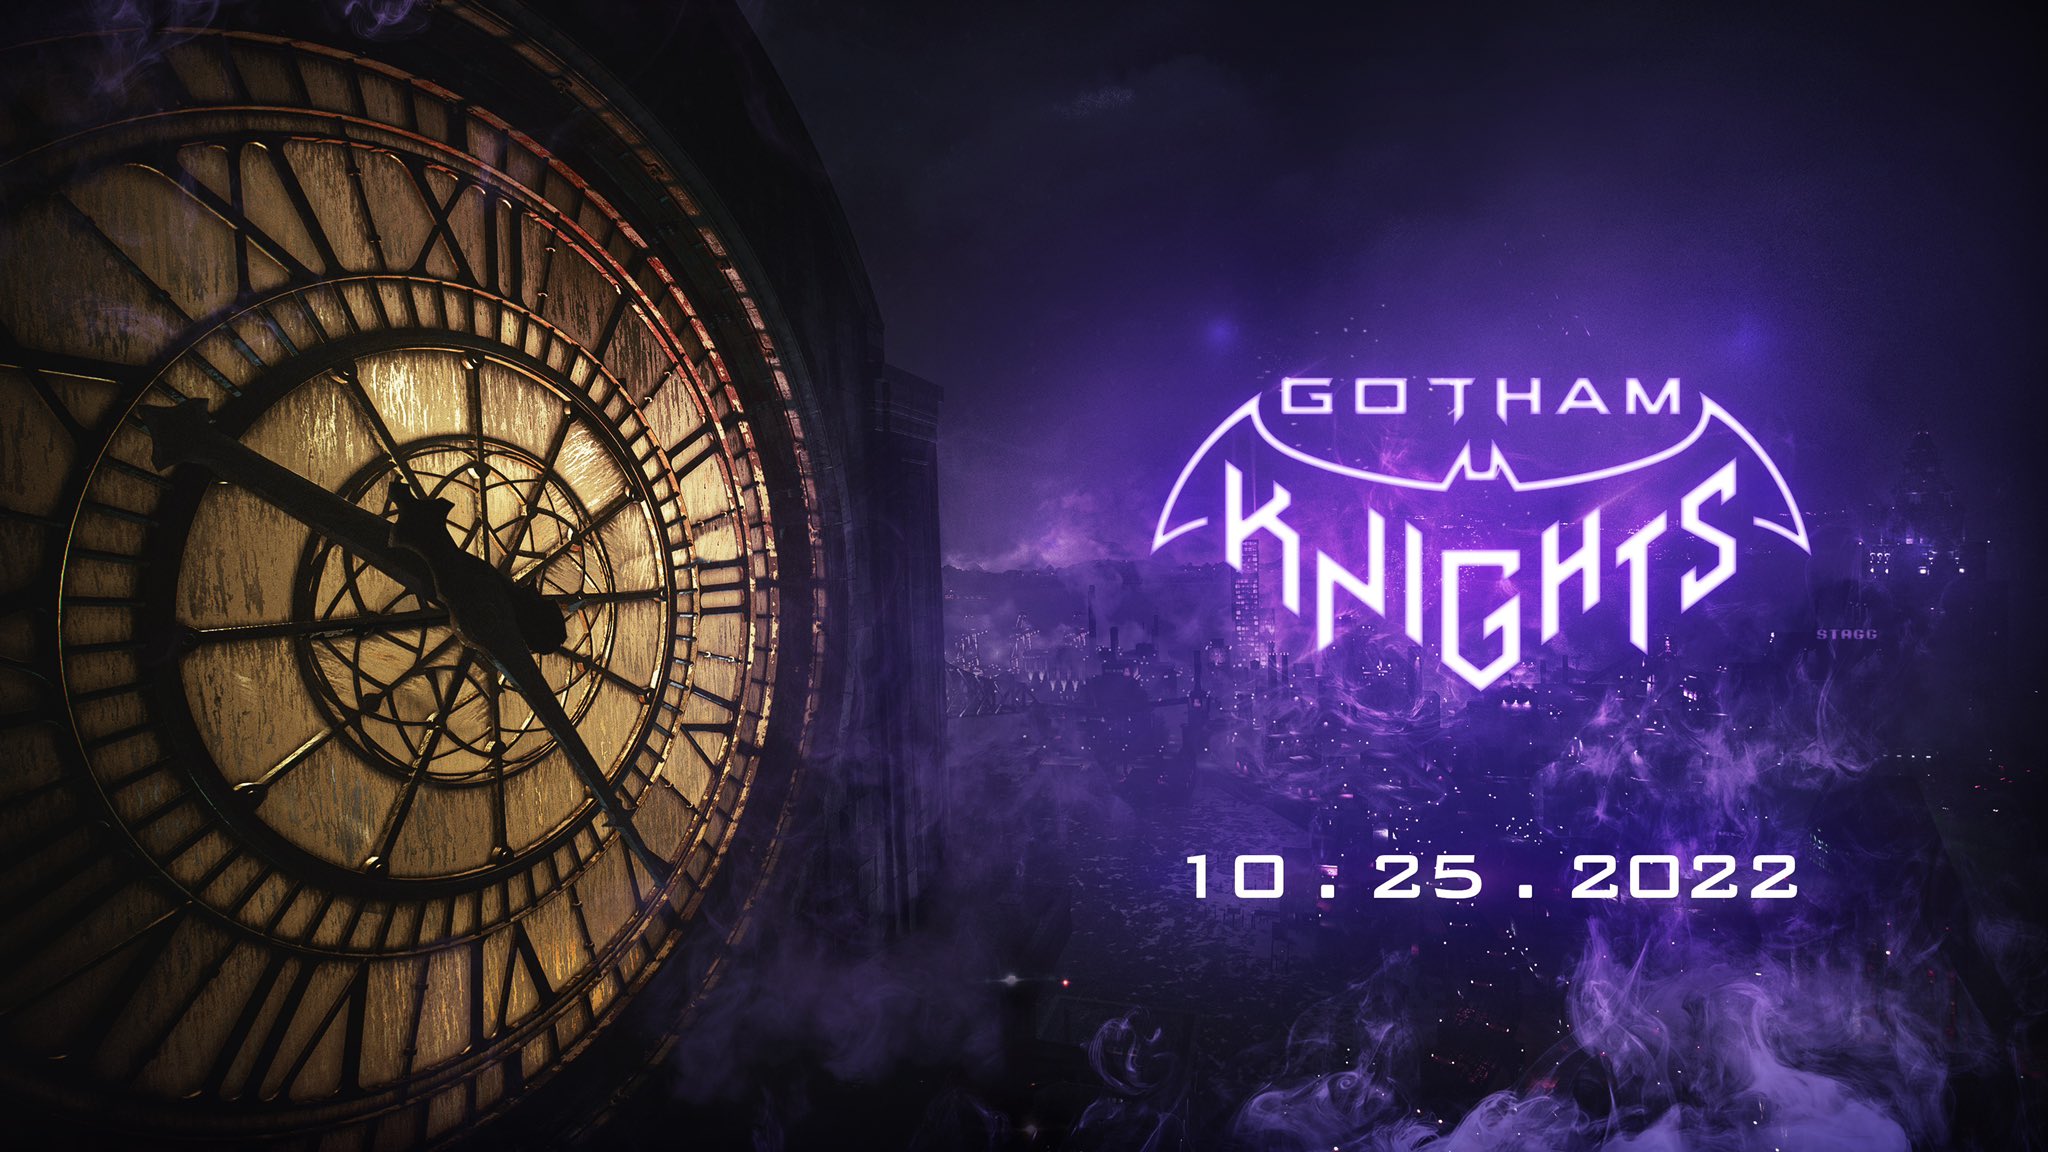 #
      Gotham Knights launches October 25